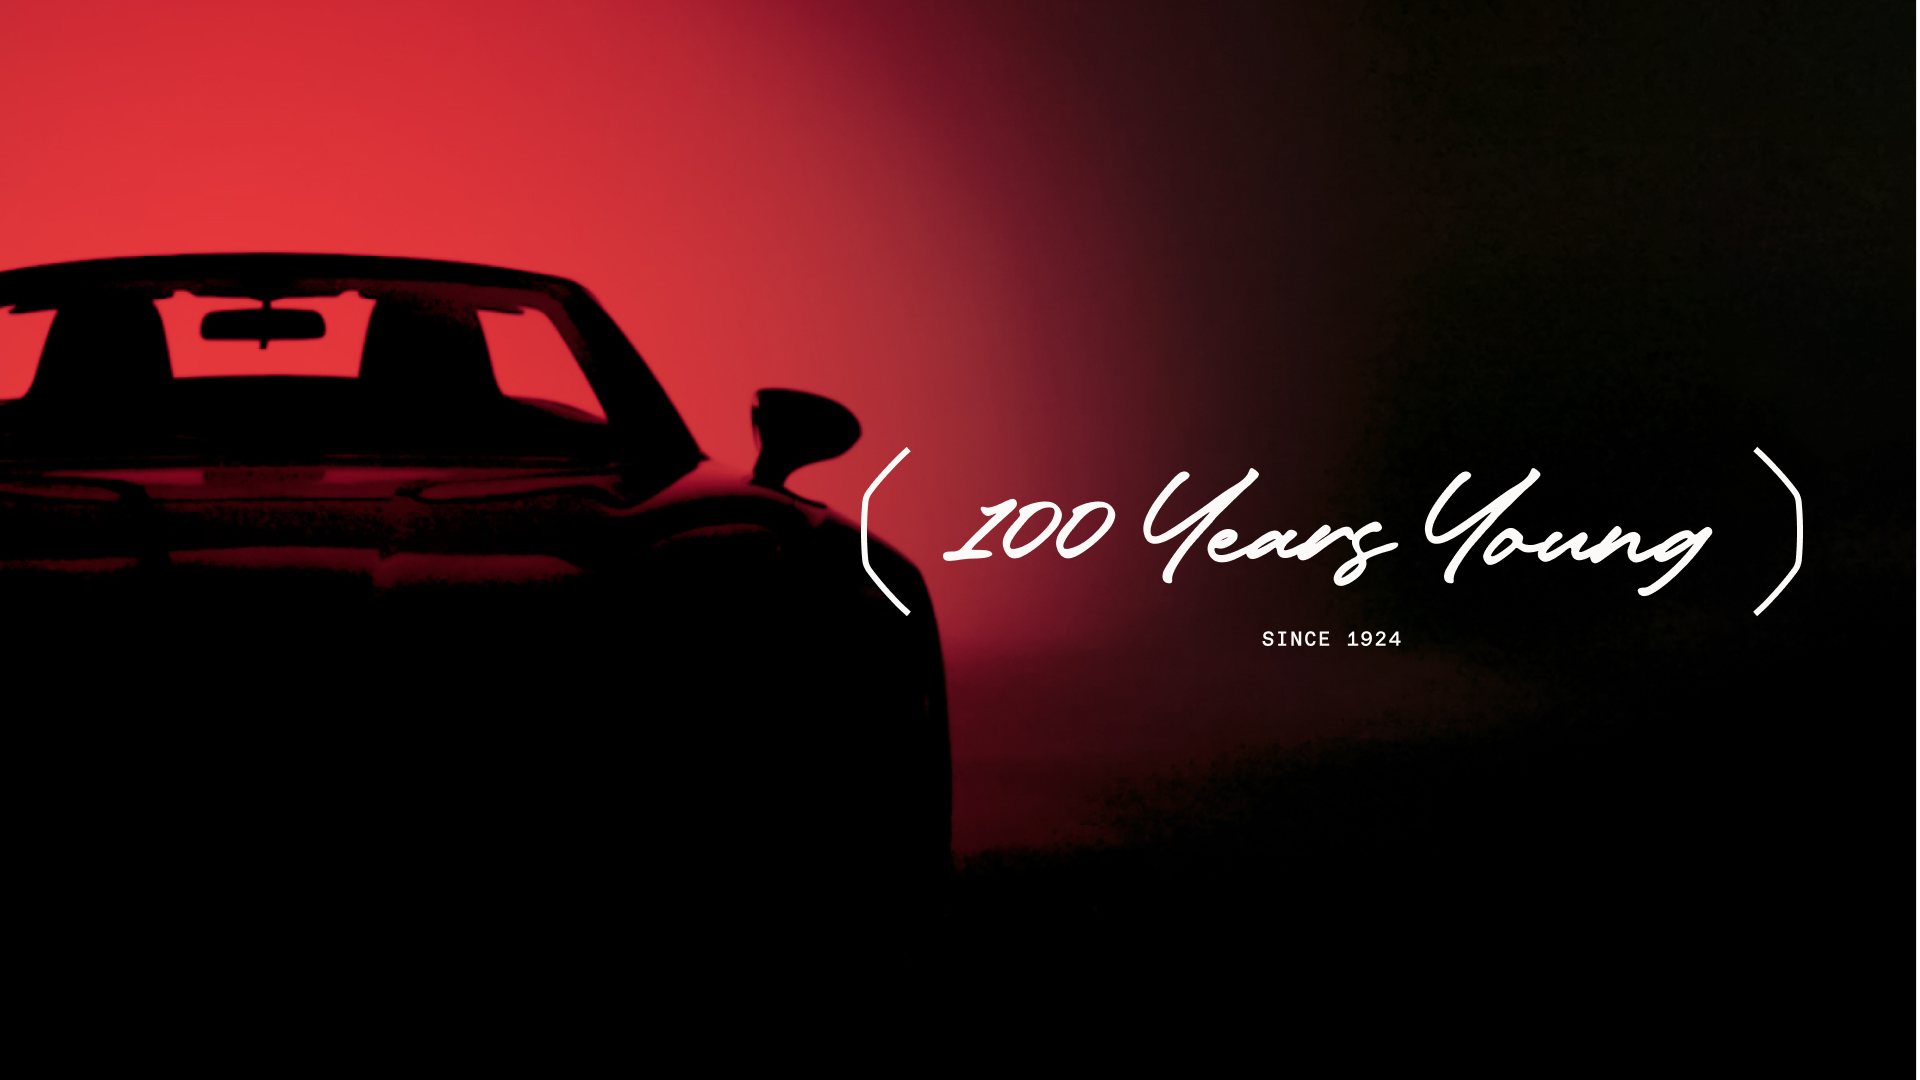 MG Centenary - 100 Years Young